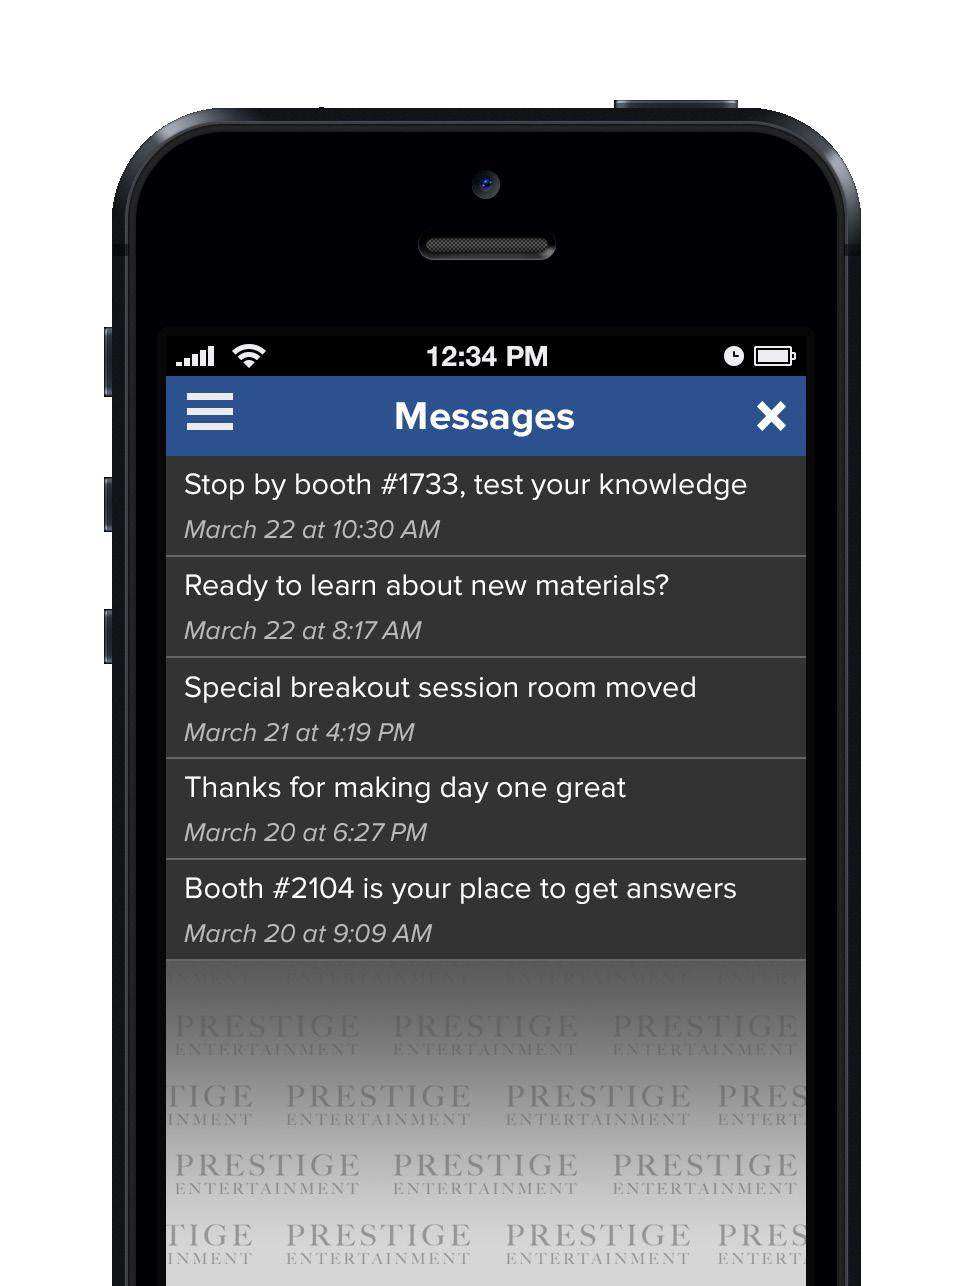 Feature a product on one of the banners or push a notification out to the thousands of attendees.